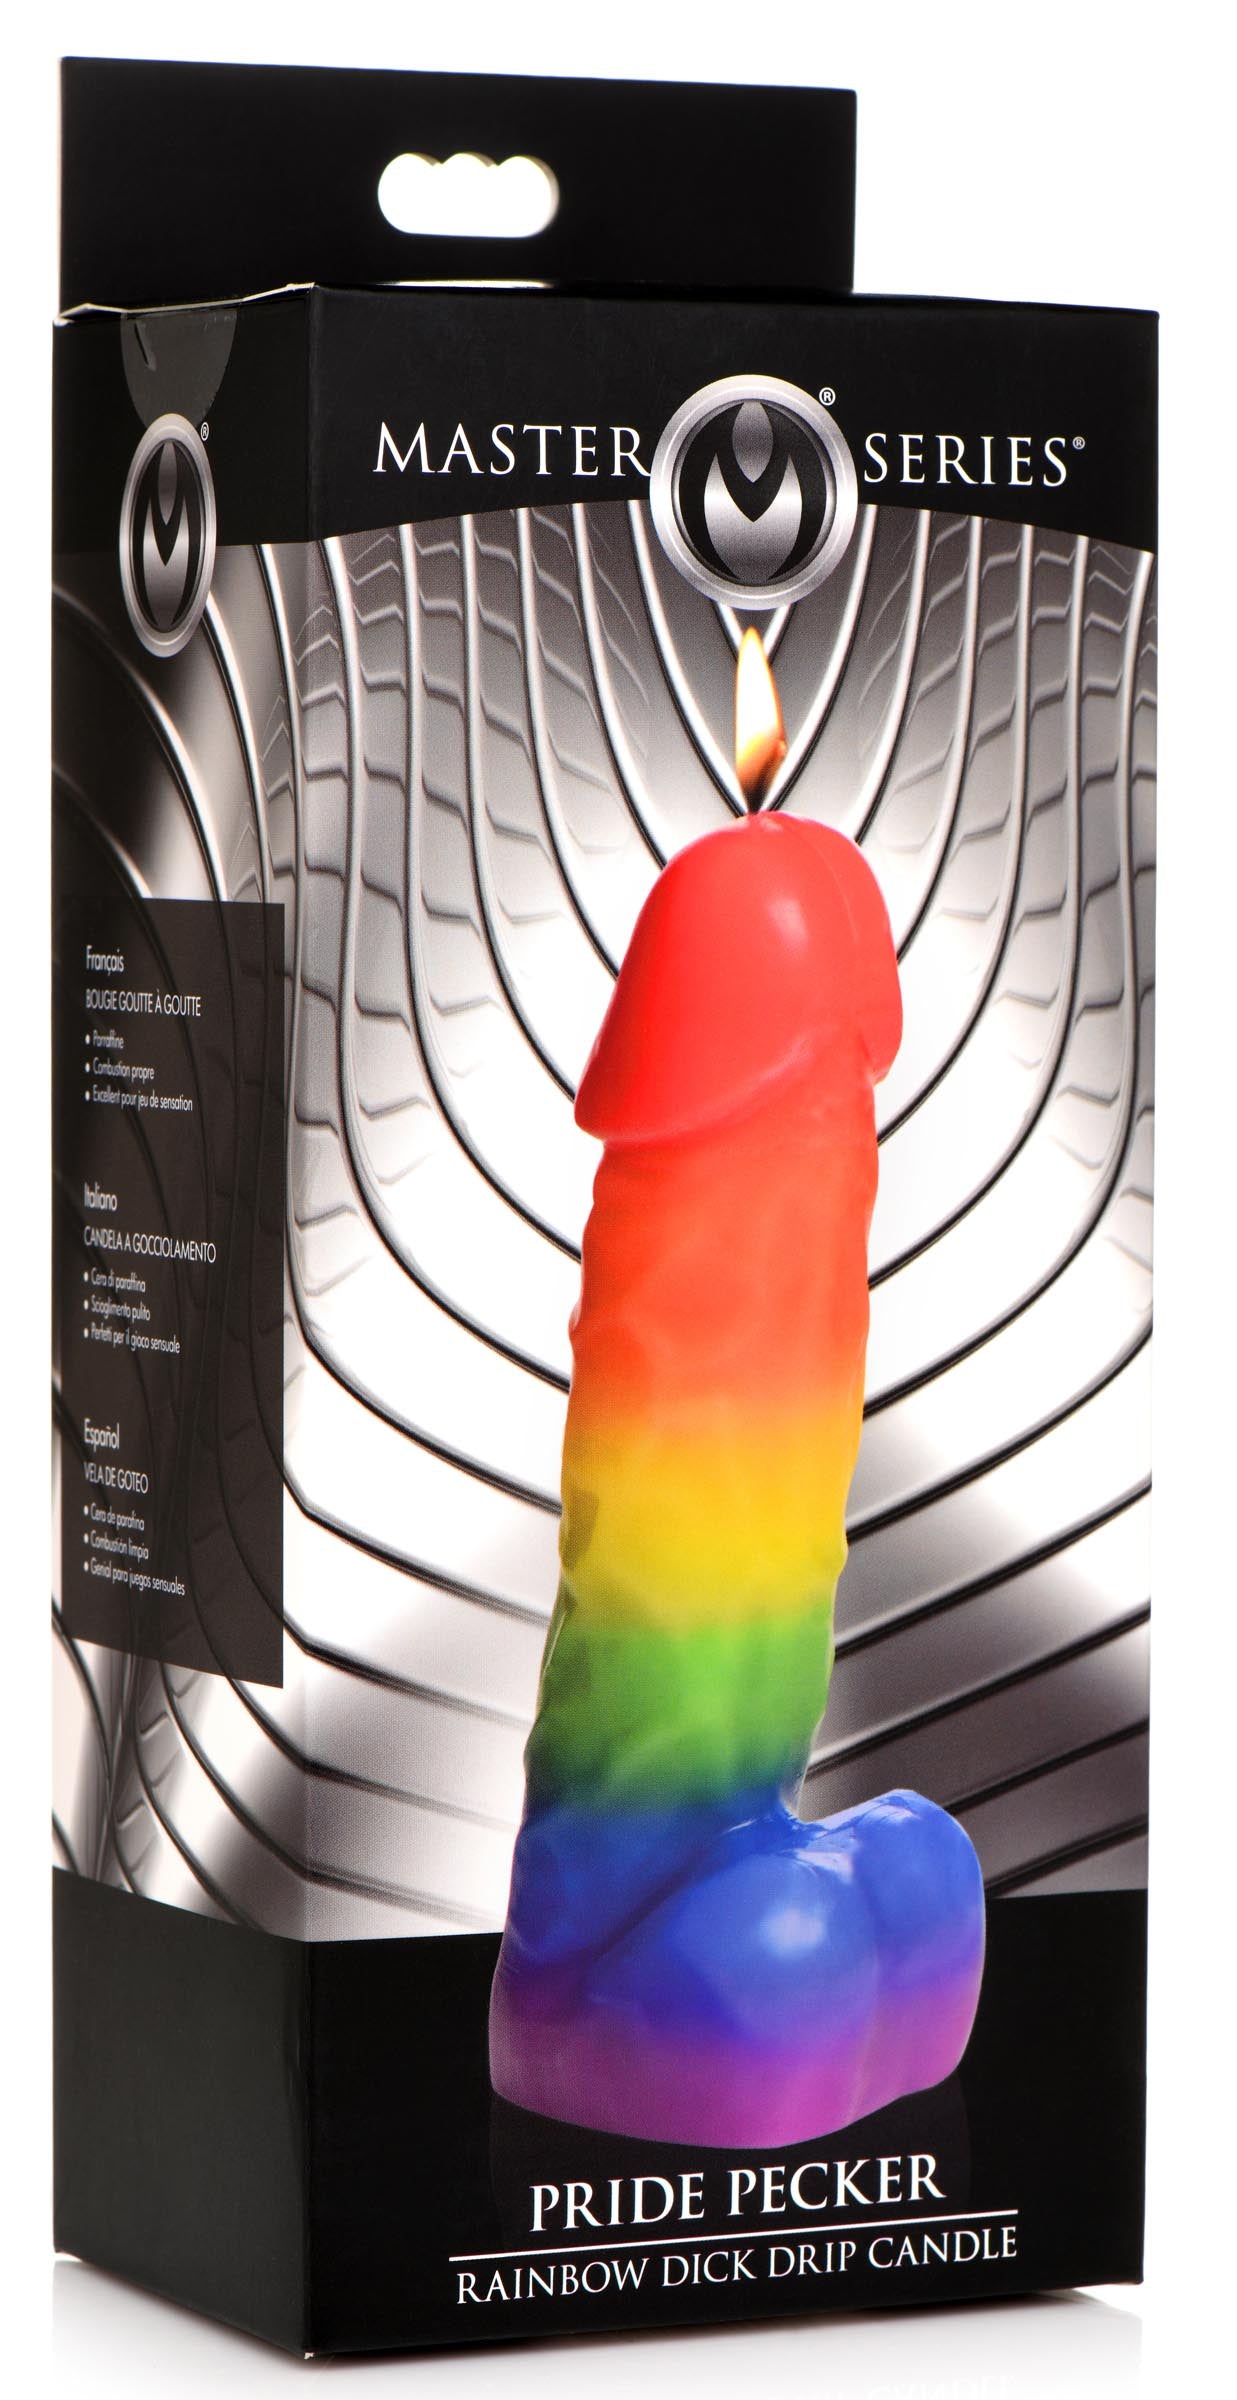 Spicy Pecker Dick Drip Candle